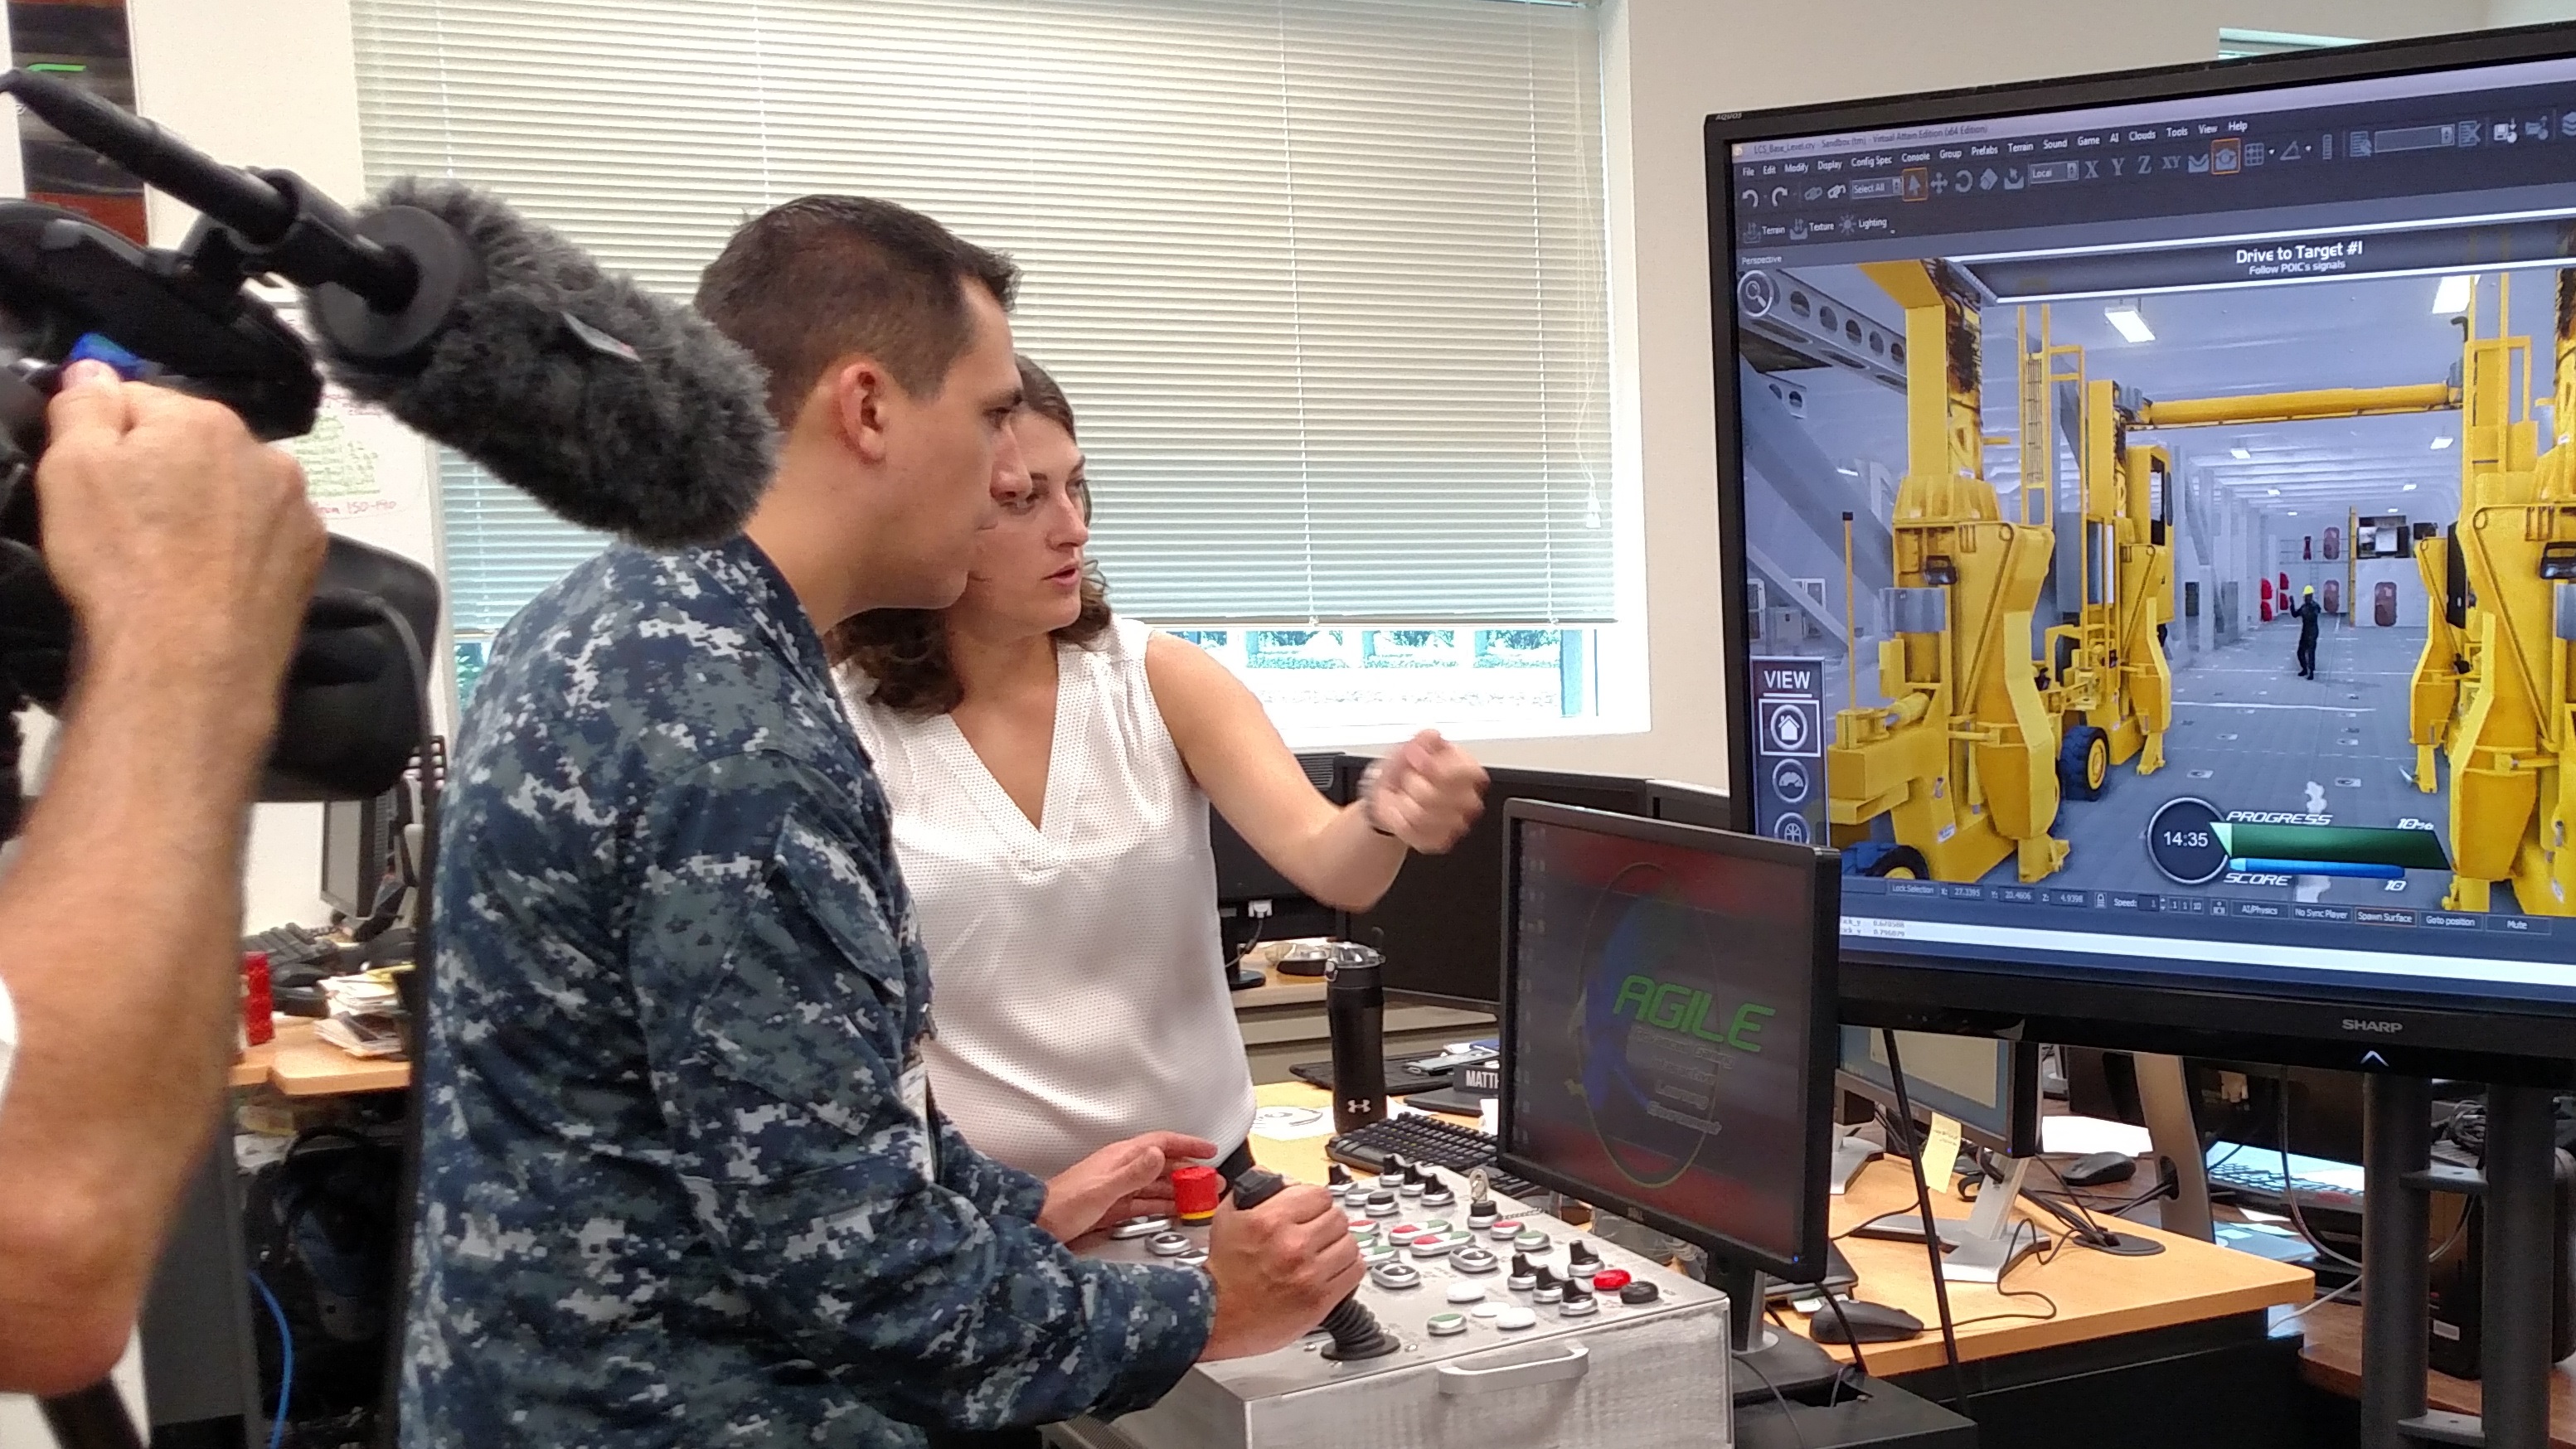 150715-N-WC128-001 ORLANDO, Fla. (July 15, 2015) Courtney McNamara, a computer scientist at the Naval Air Warfare Center Training Systems Division, demonstrates a Littoral Combat Ship (LCS) virtual cargo handling trainer to MC1(SW/AW) Elliot Fabrizio.   Fabrizio was in Orlando producing a "Weekly Wire Rundown" video feature about training in virtual reality environments.   (U.S. Navy Photo by Brian Roscoe/Released)